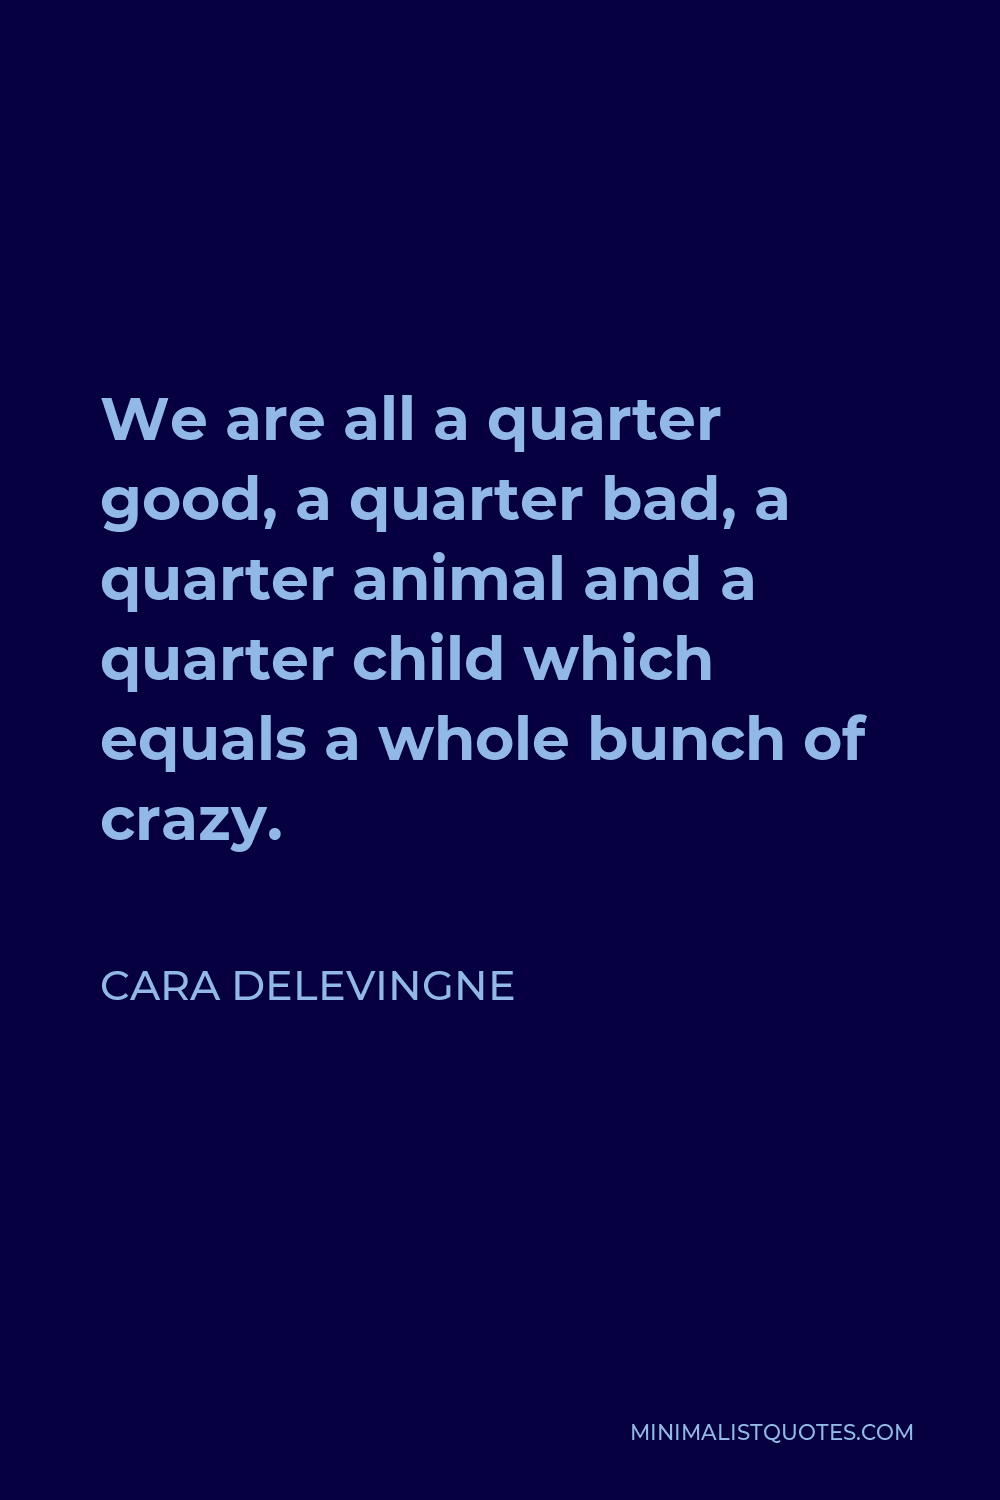 Cara Delevingne Quote - We are all a quarter good, a quarter bad, a quarter animal and a quarter child which equals a whole bunch of crazy.